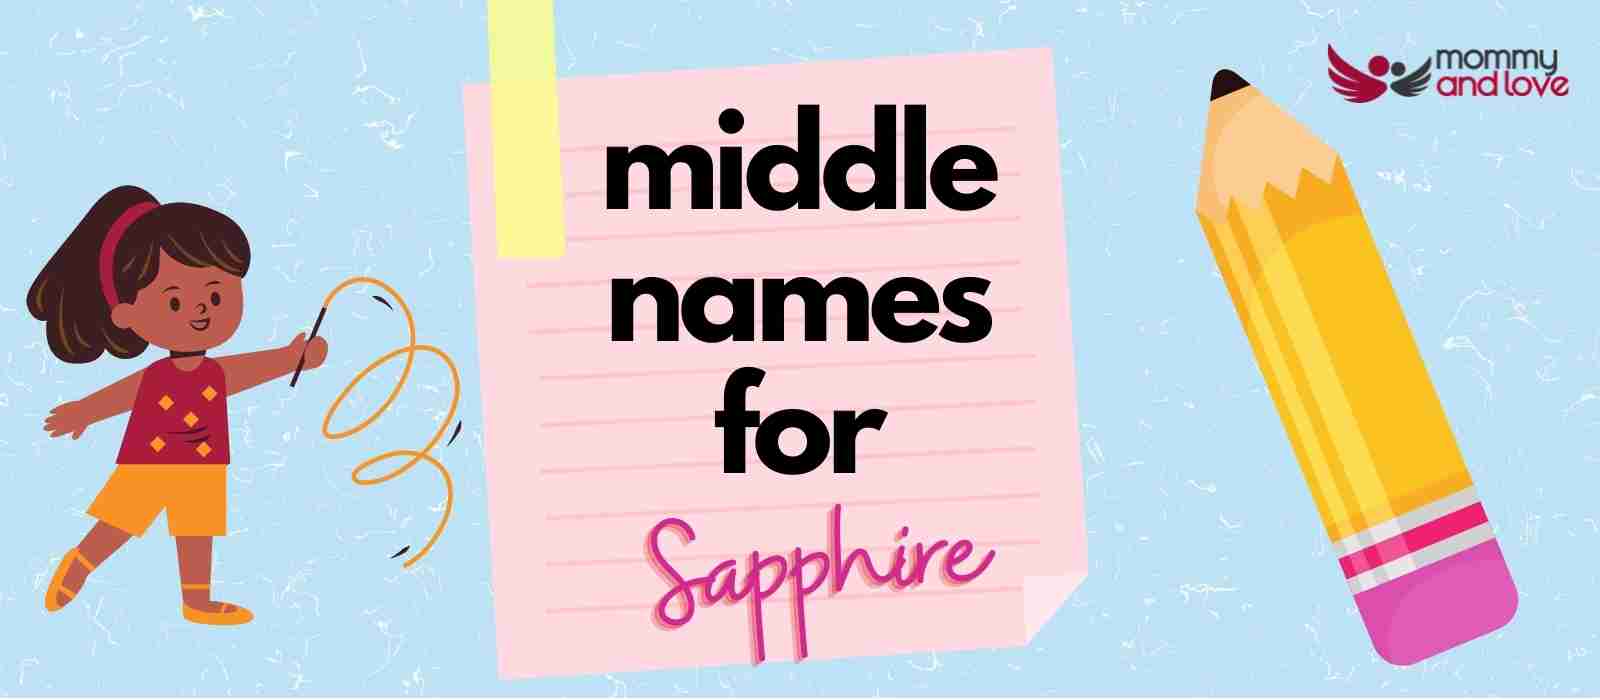 iddle Names for Sapphire